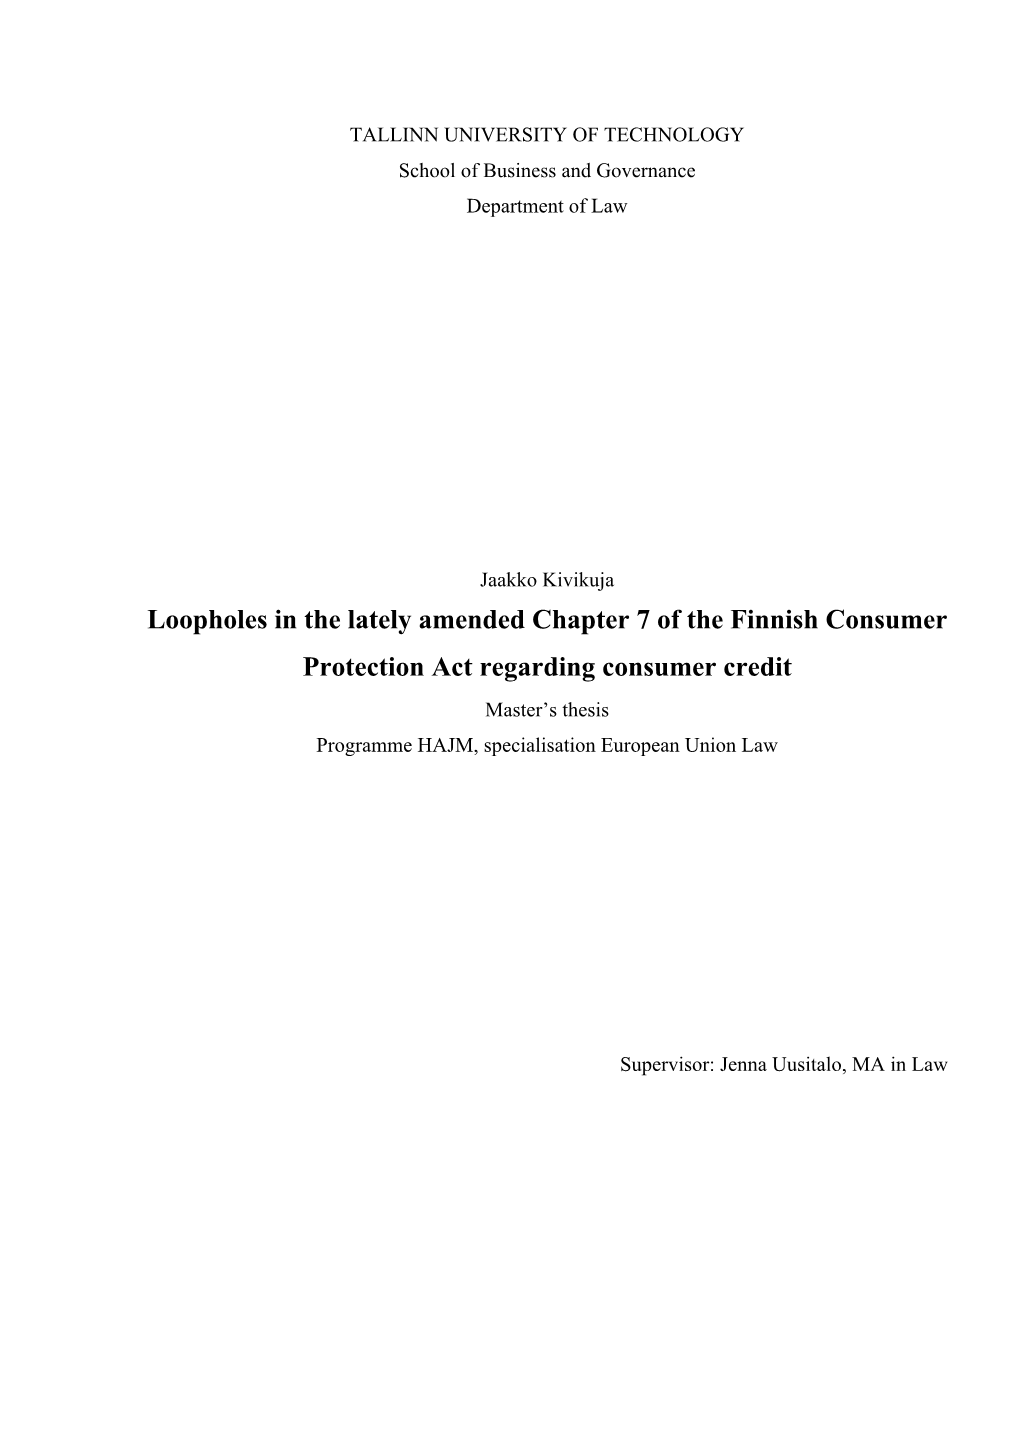 Loopholes in the Lately Amended Chapter 7 of the Finnish Consumer